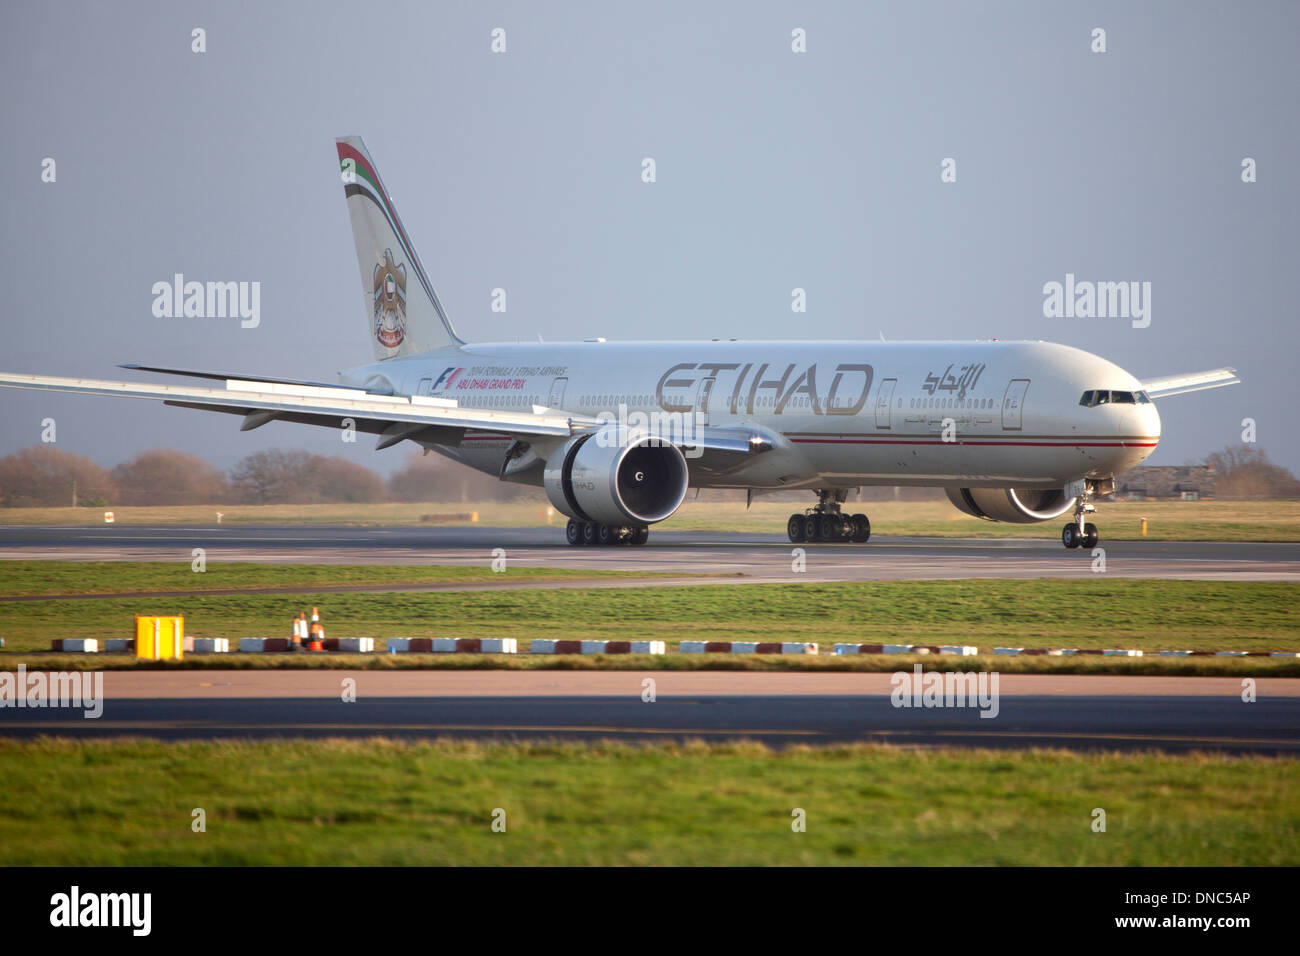 Etihad Boeing 777 aircraft landing and taxiing at Manchester Airport Stock Photo